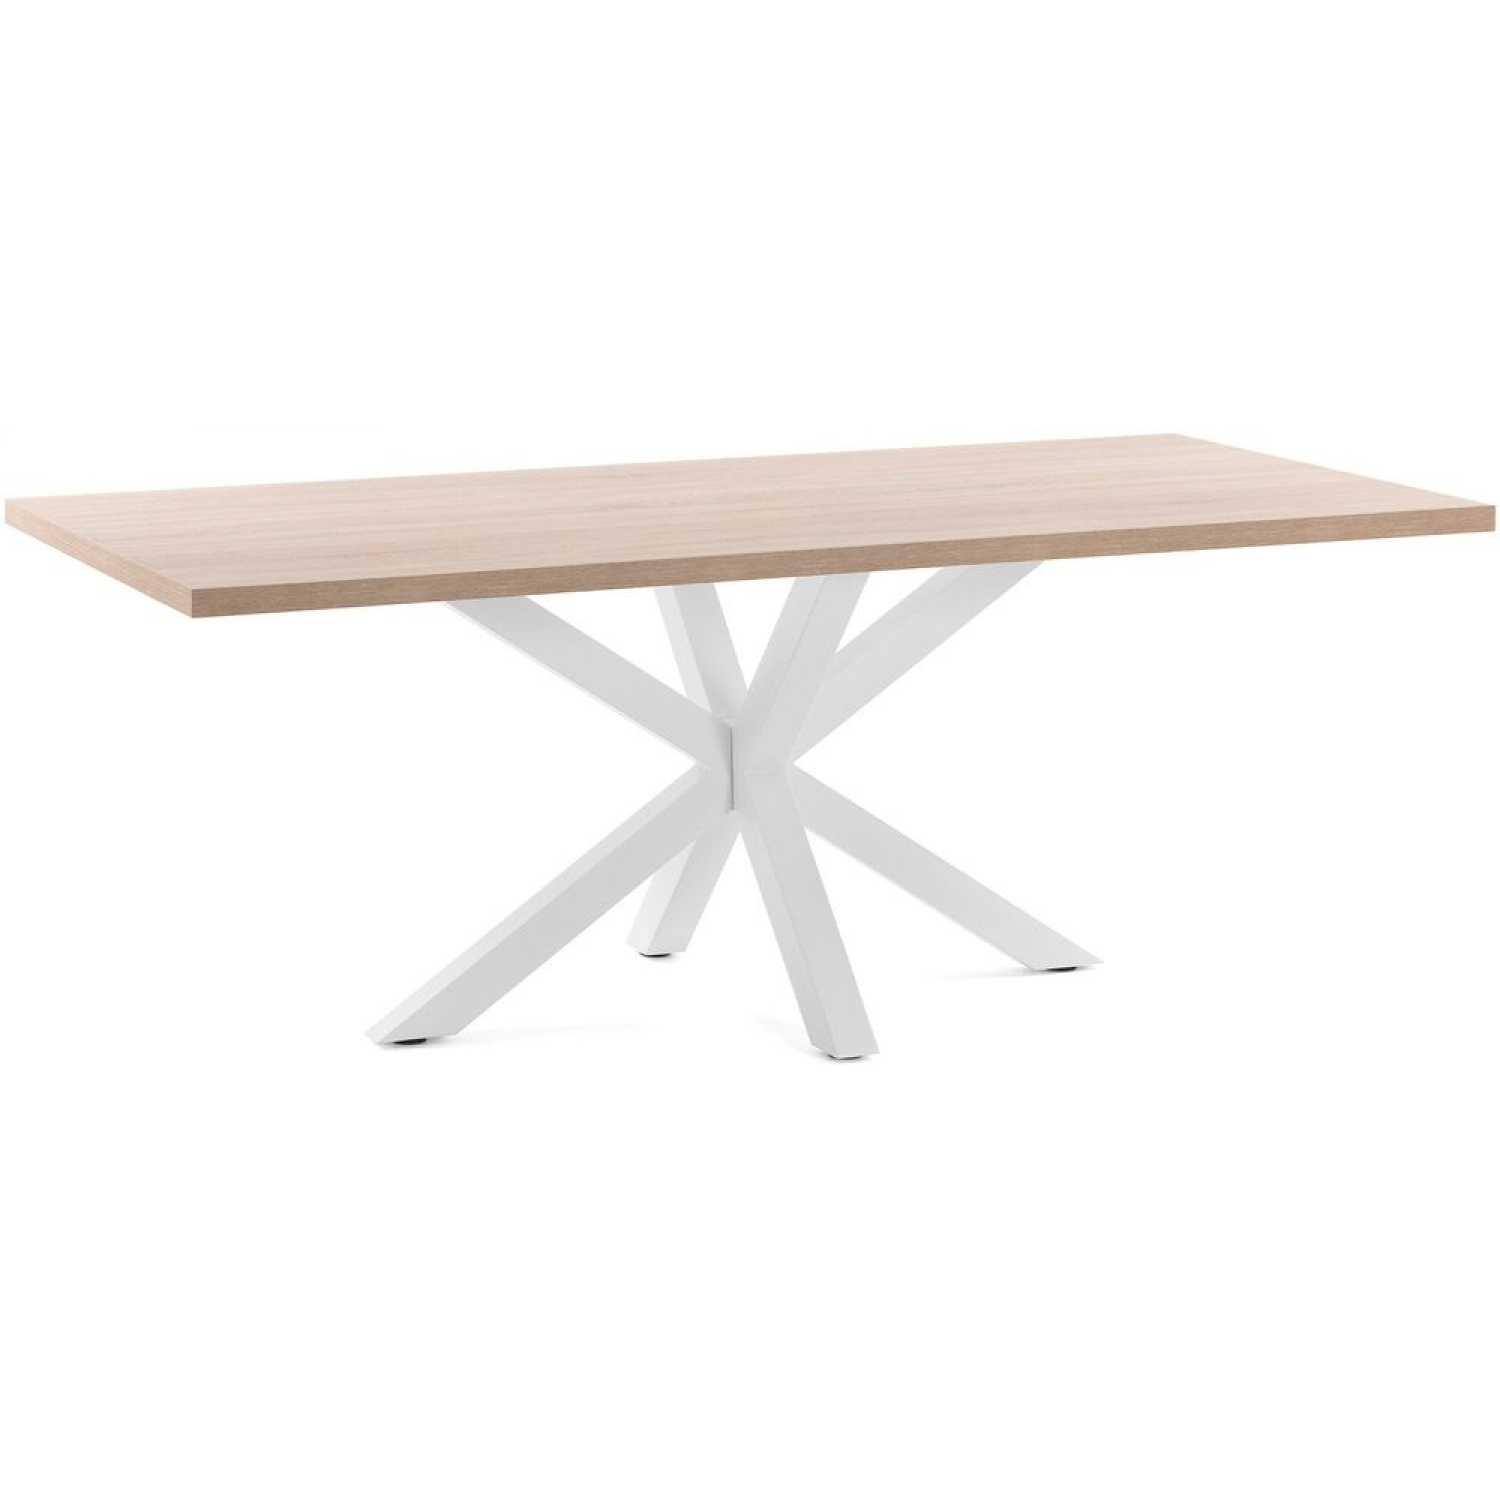 La Forma New Arya Dining Table - Natural & White